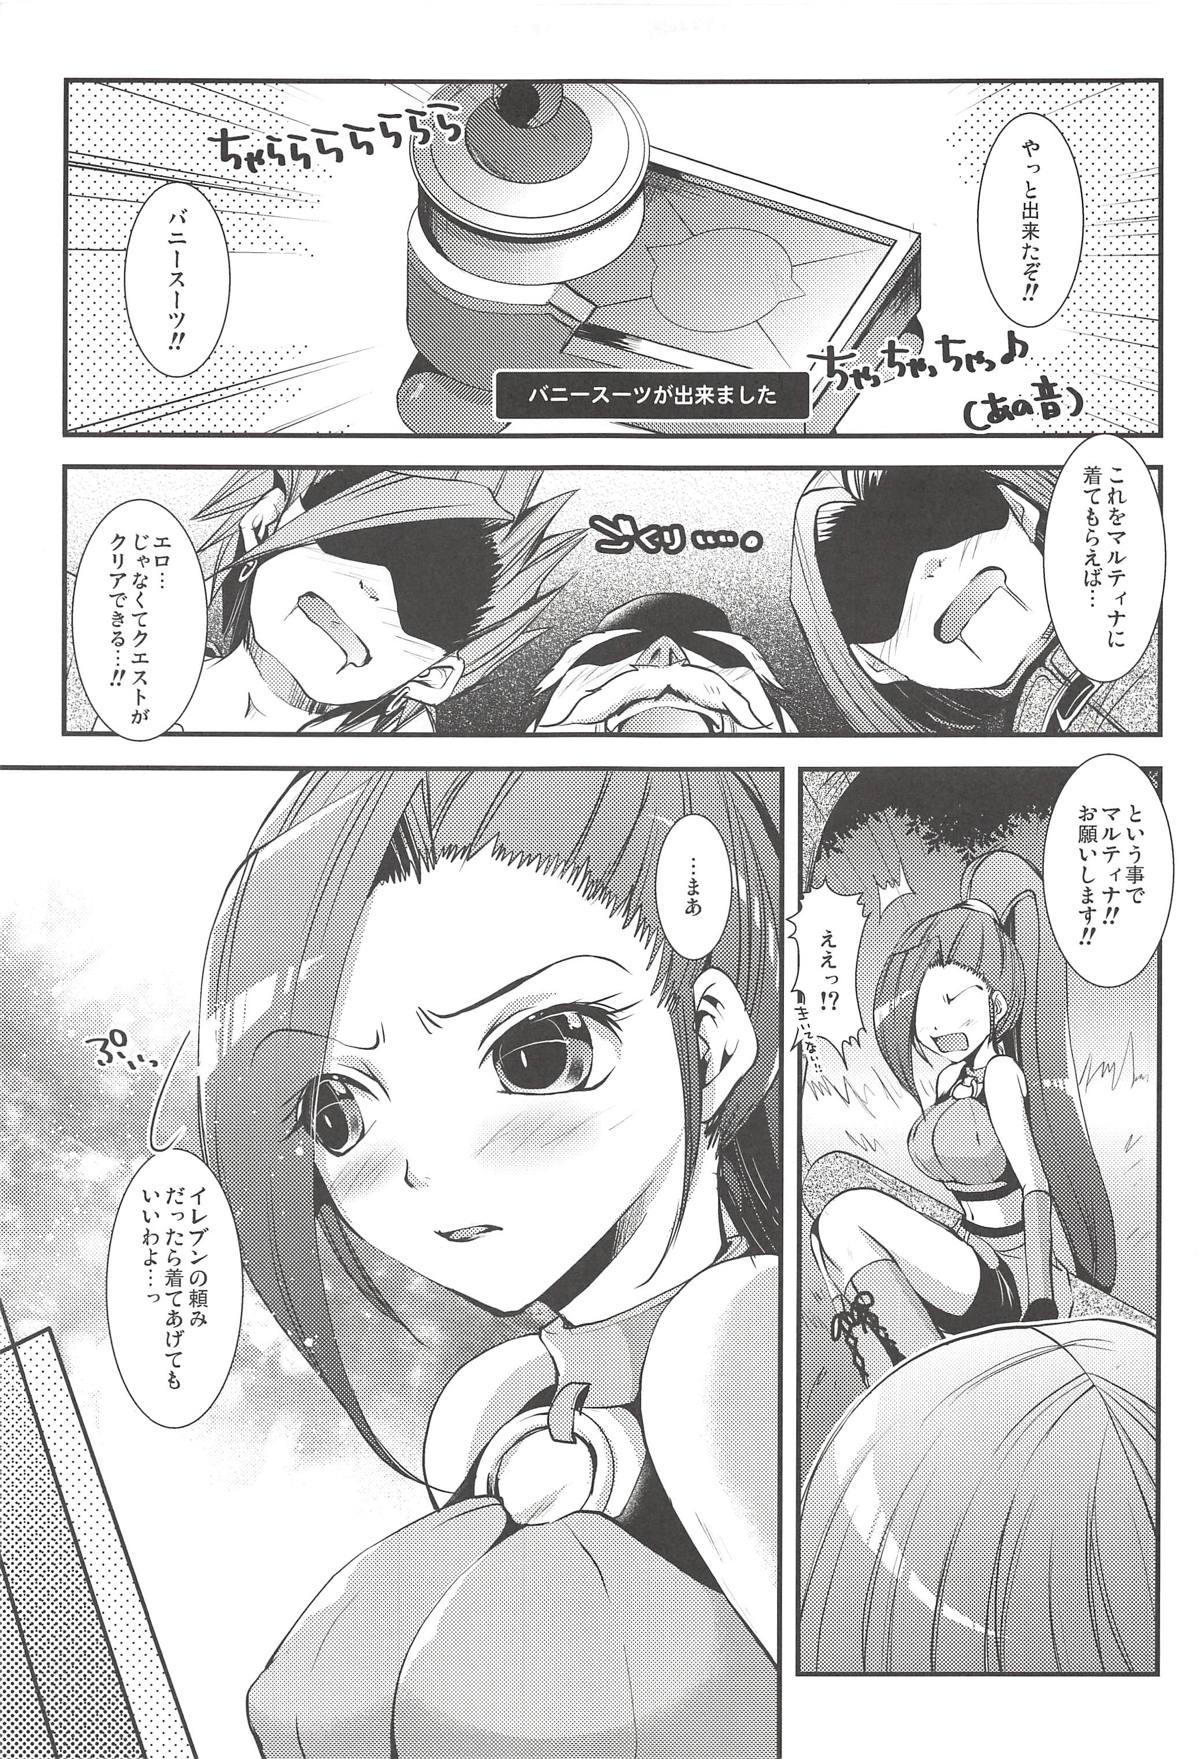 Matures Shippai Bunny - Failure of Bunny Suit - Dragon quest xi Free Blow Job - Page 4